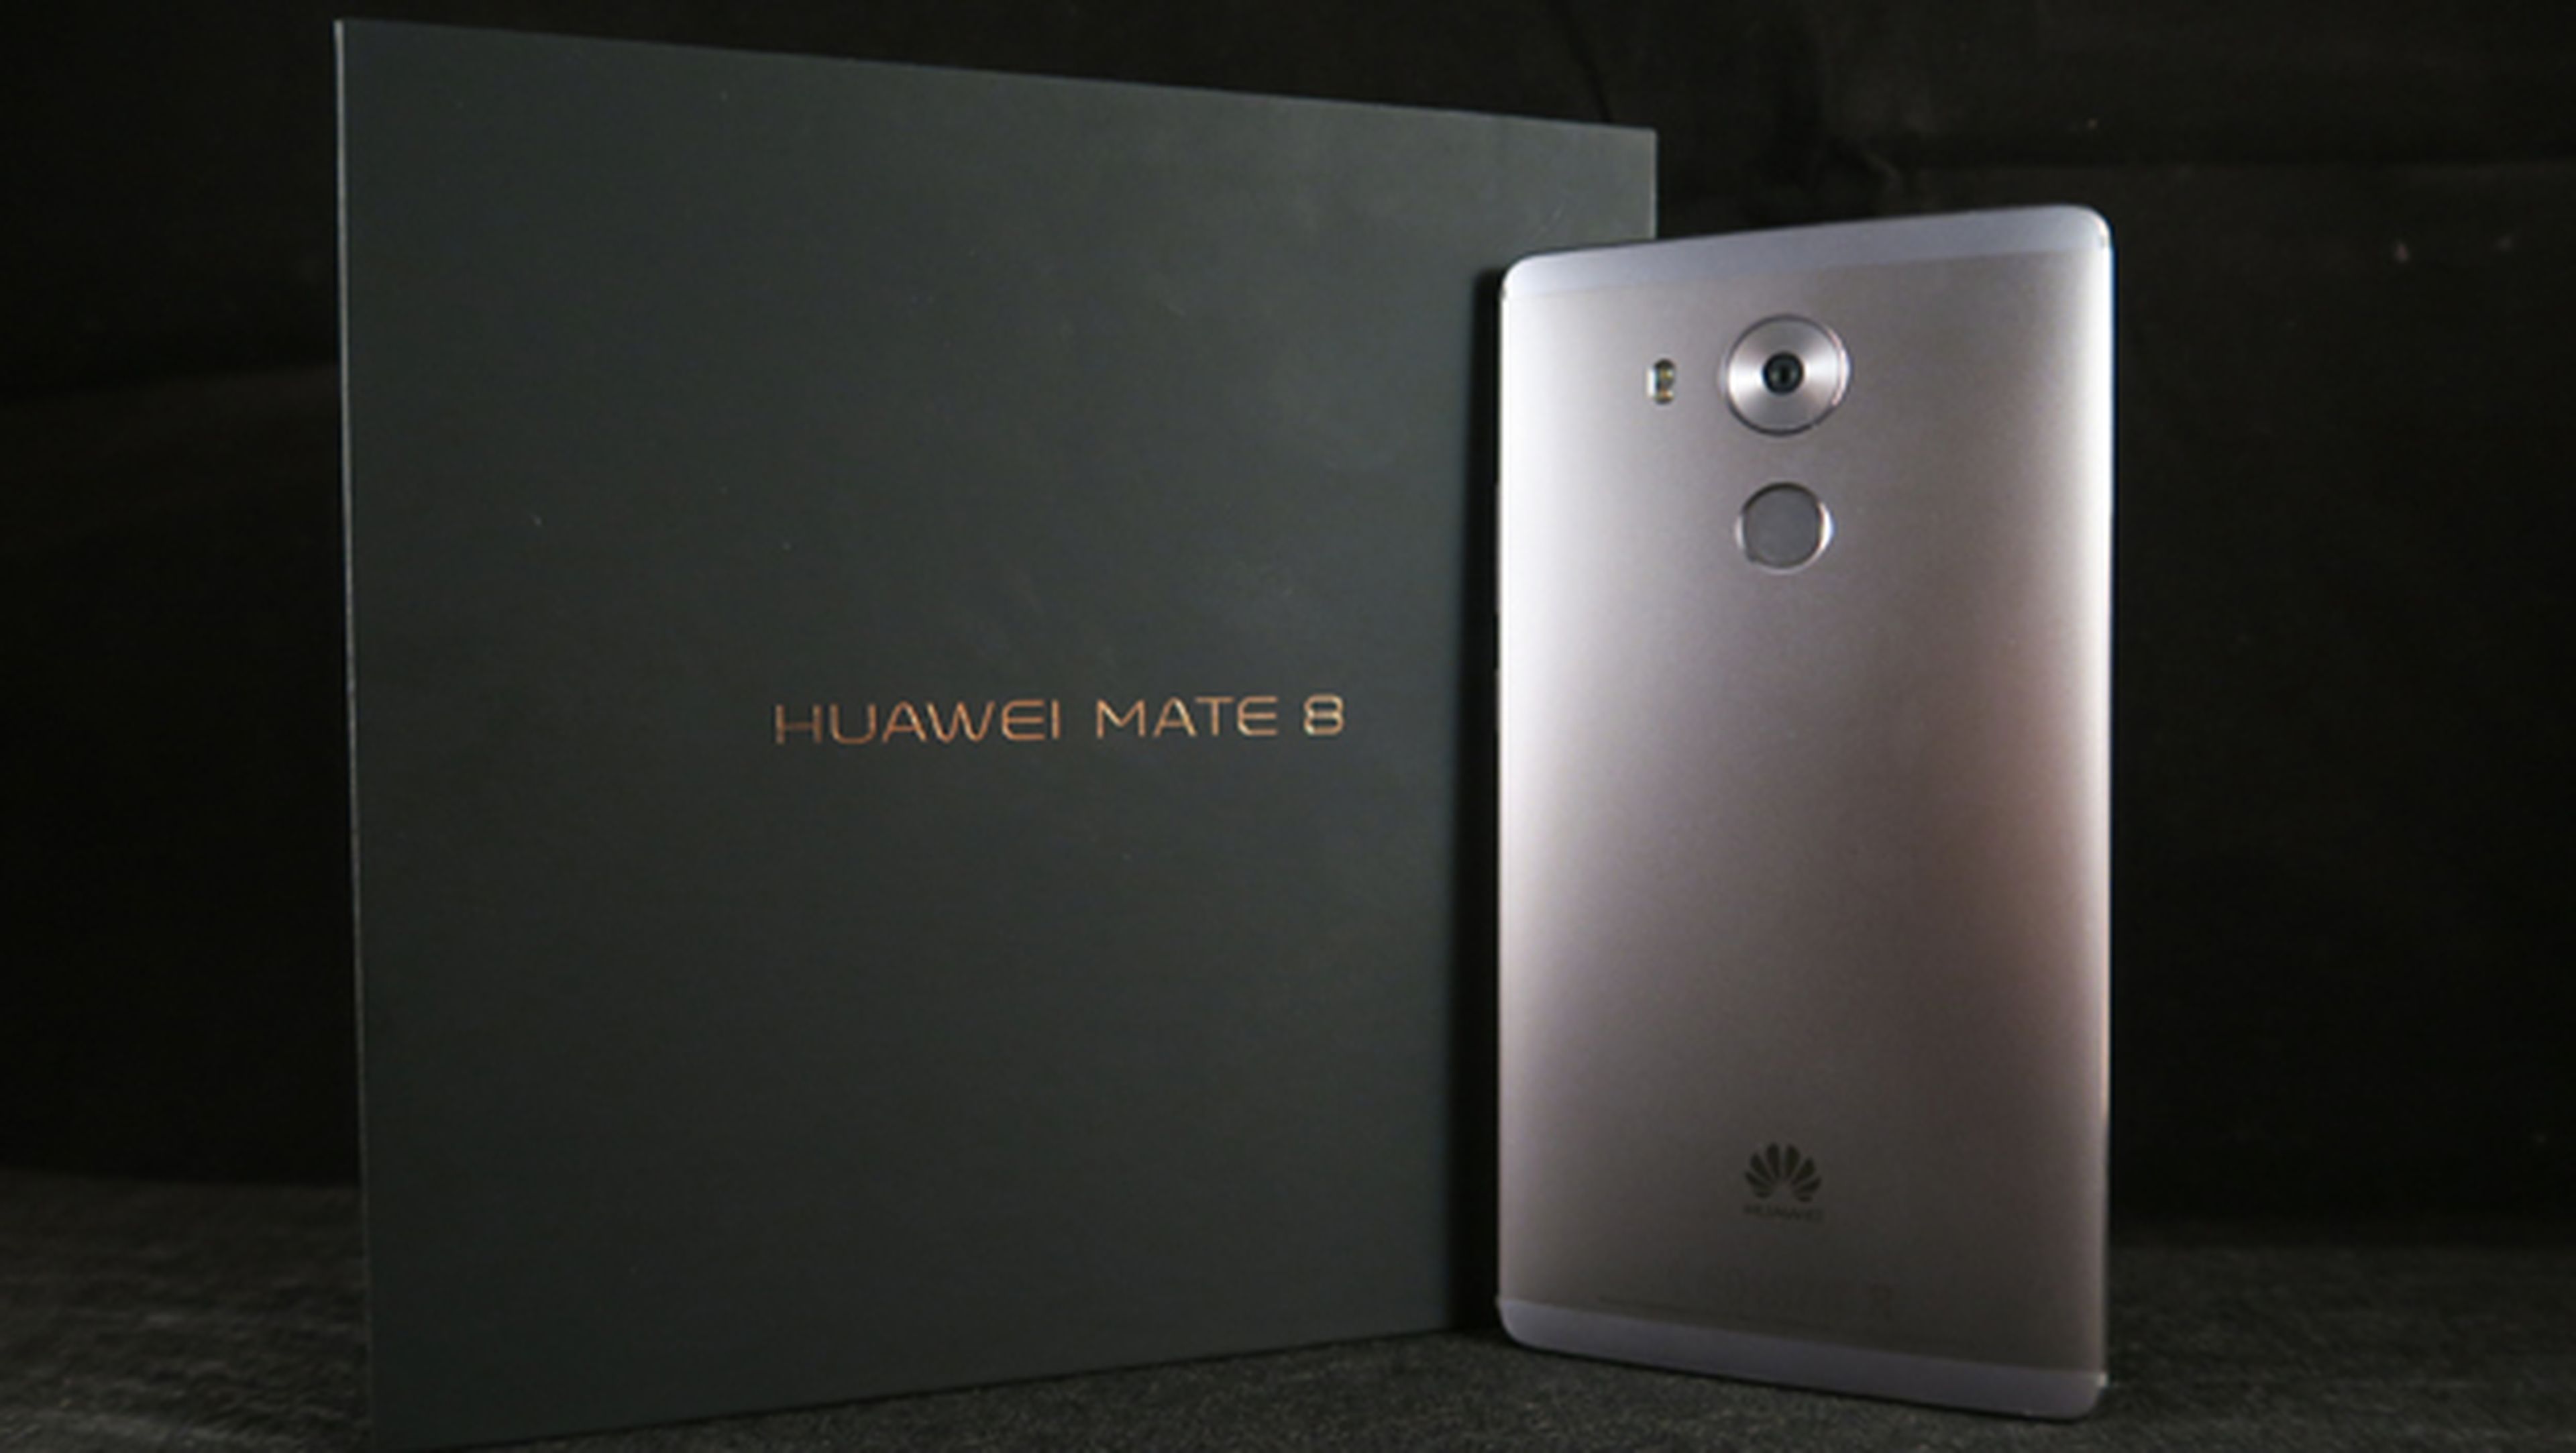 Unboxing del Huawei Mate 8